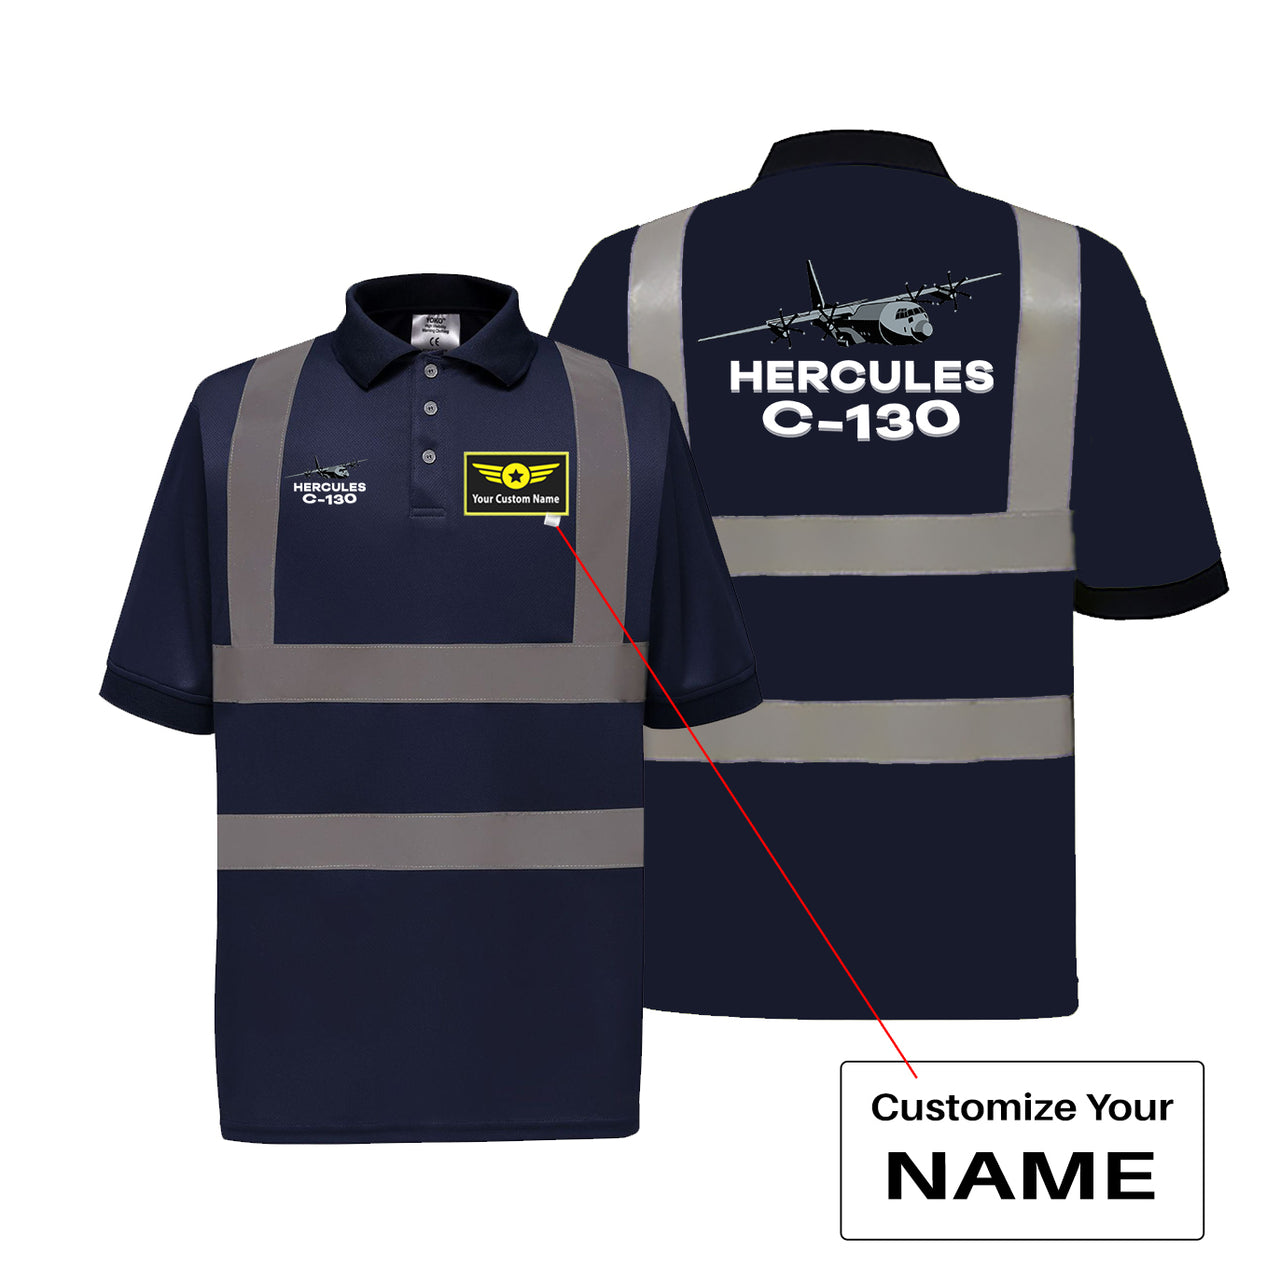 The Hercules C130 Designed Reflective Polo T-Shirts